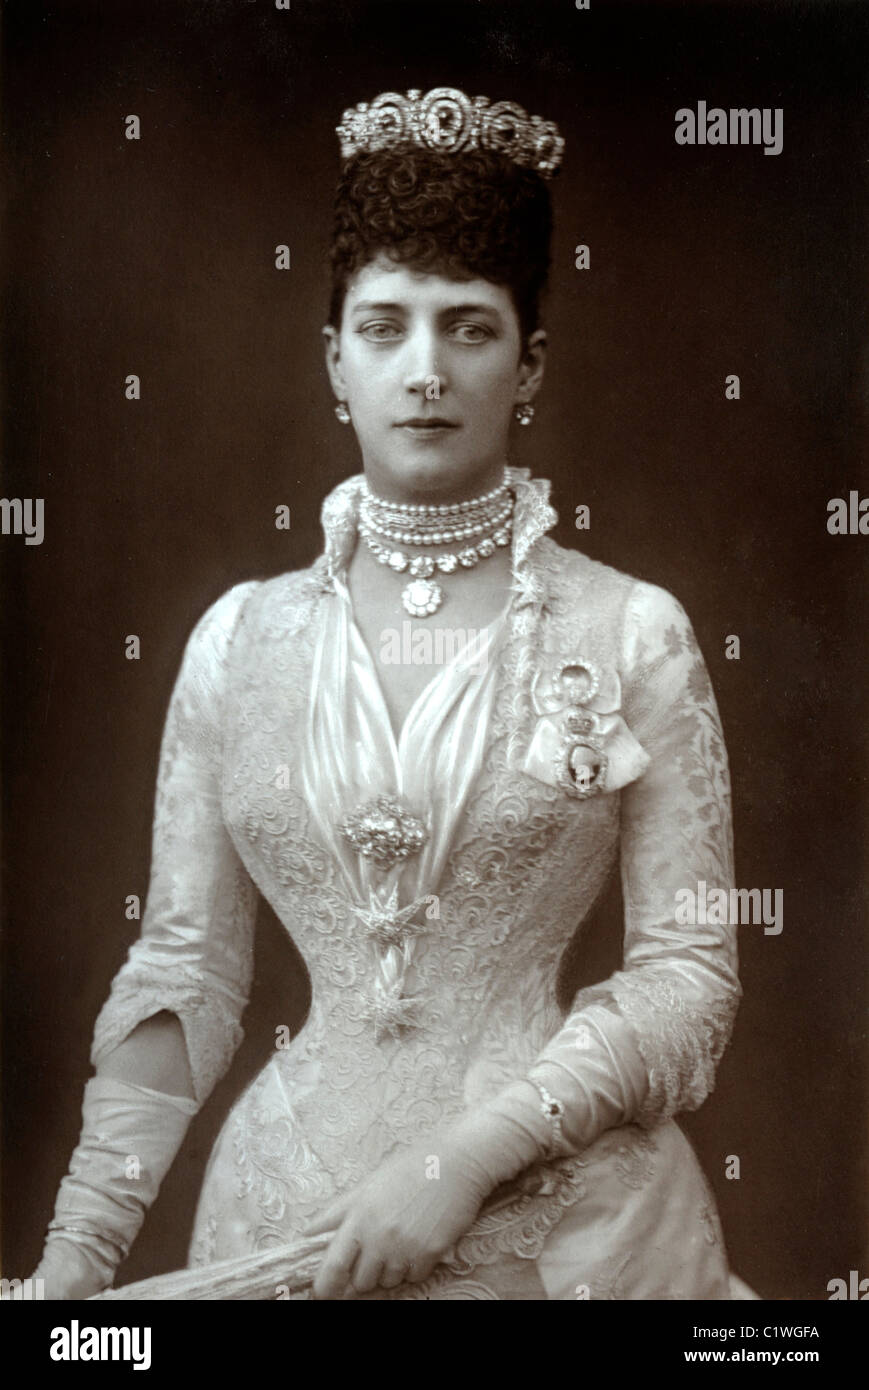 Portrait of Princess Alexandra of Denmark (1844-1925) Queen of England, Great Britain, UK & Consort of King Edward VII Wearing Edwardian Clothes & Corset Showing a Wasp Waist. Woodburytype Photo c1889 Stock Photo